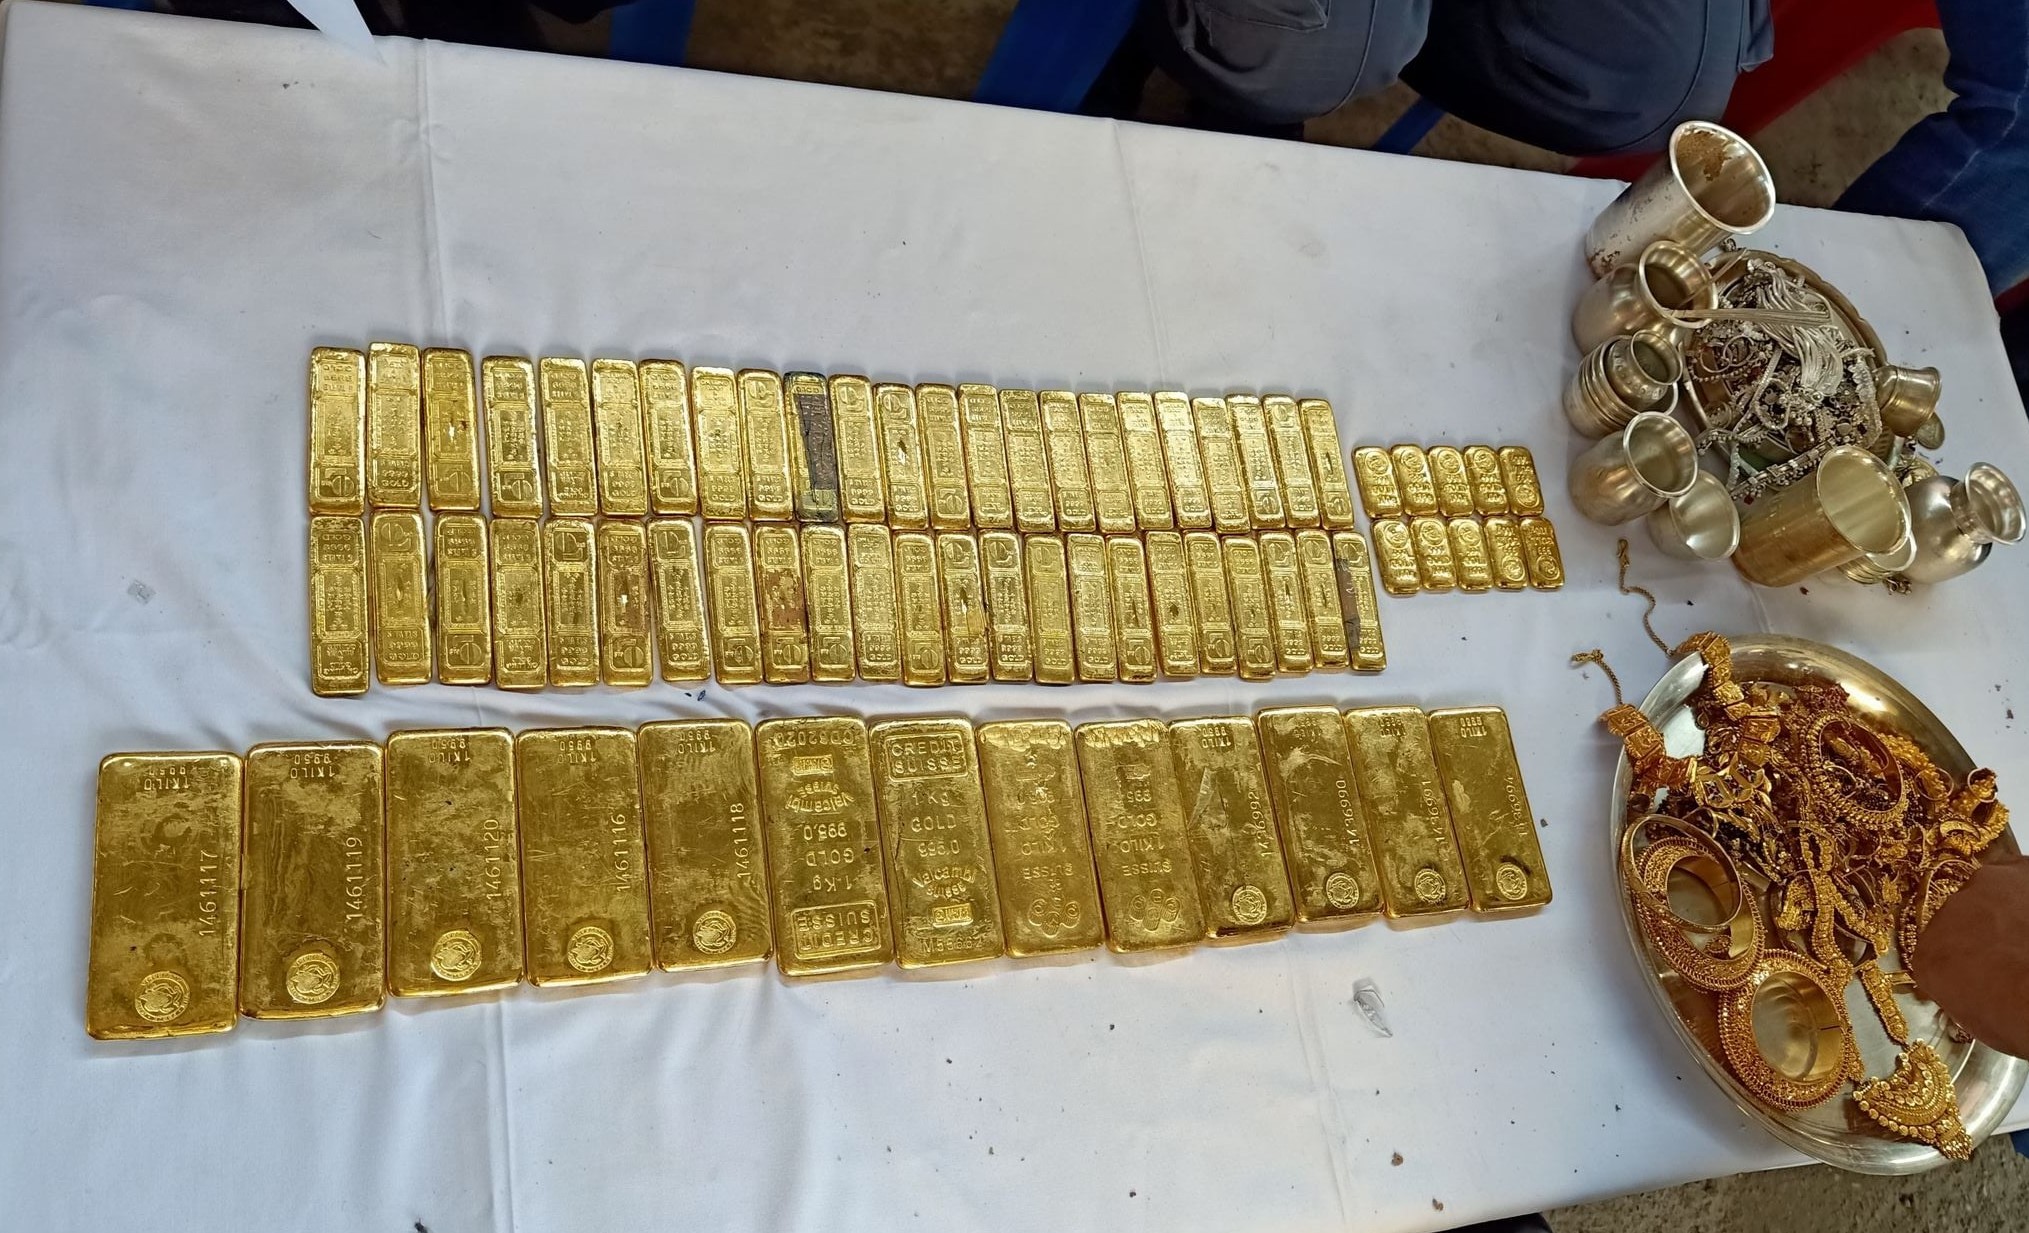 22 kg gold case: Police claim gold as gold-like metal